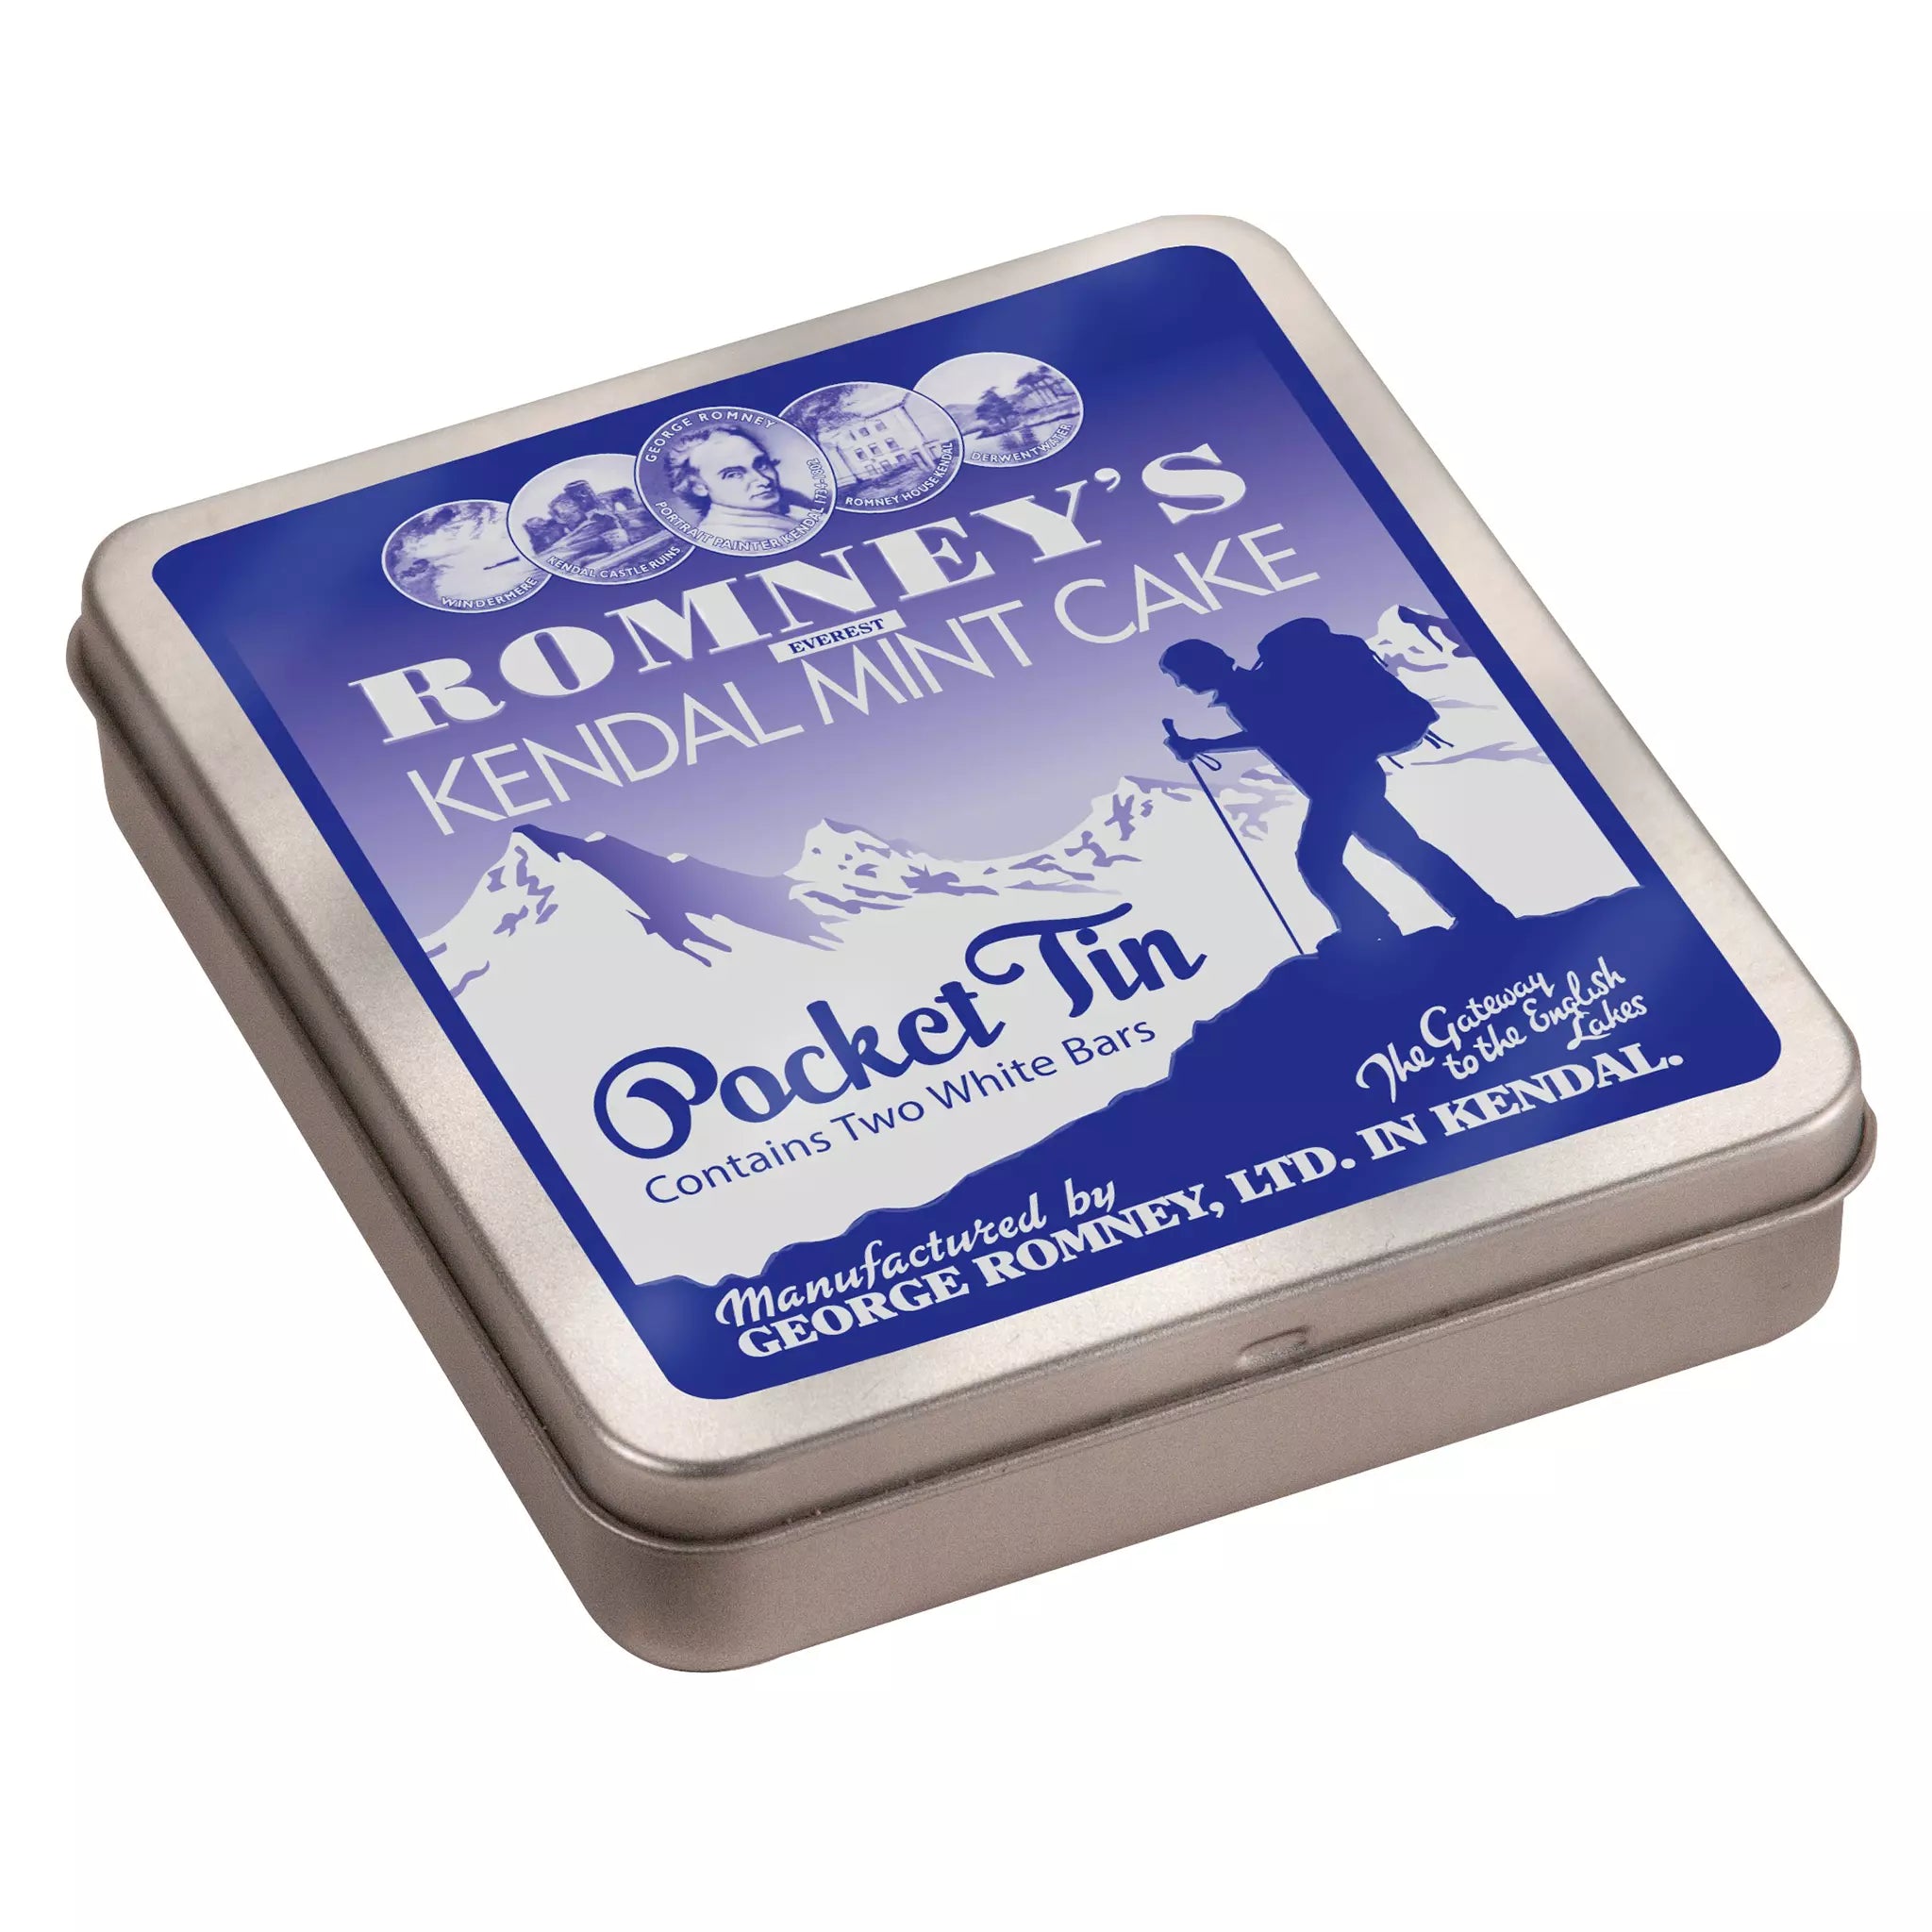 A product image of a square tin that is blue and silver in colour and has the Romney's logo, an image of a walker and some hill embossed into the lid of the tin. It also has the words 'Blue Kendal Mint Cake'.